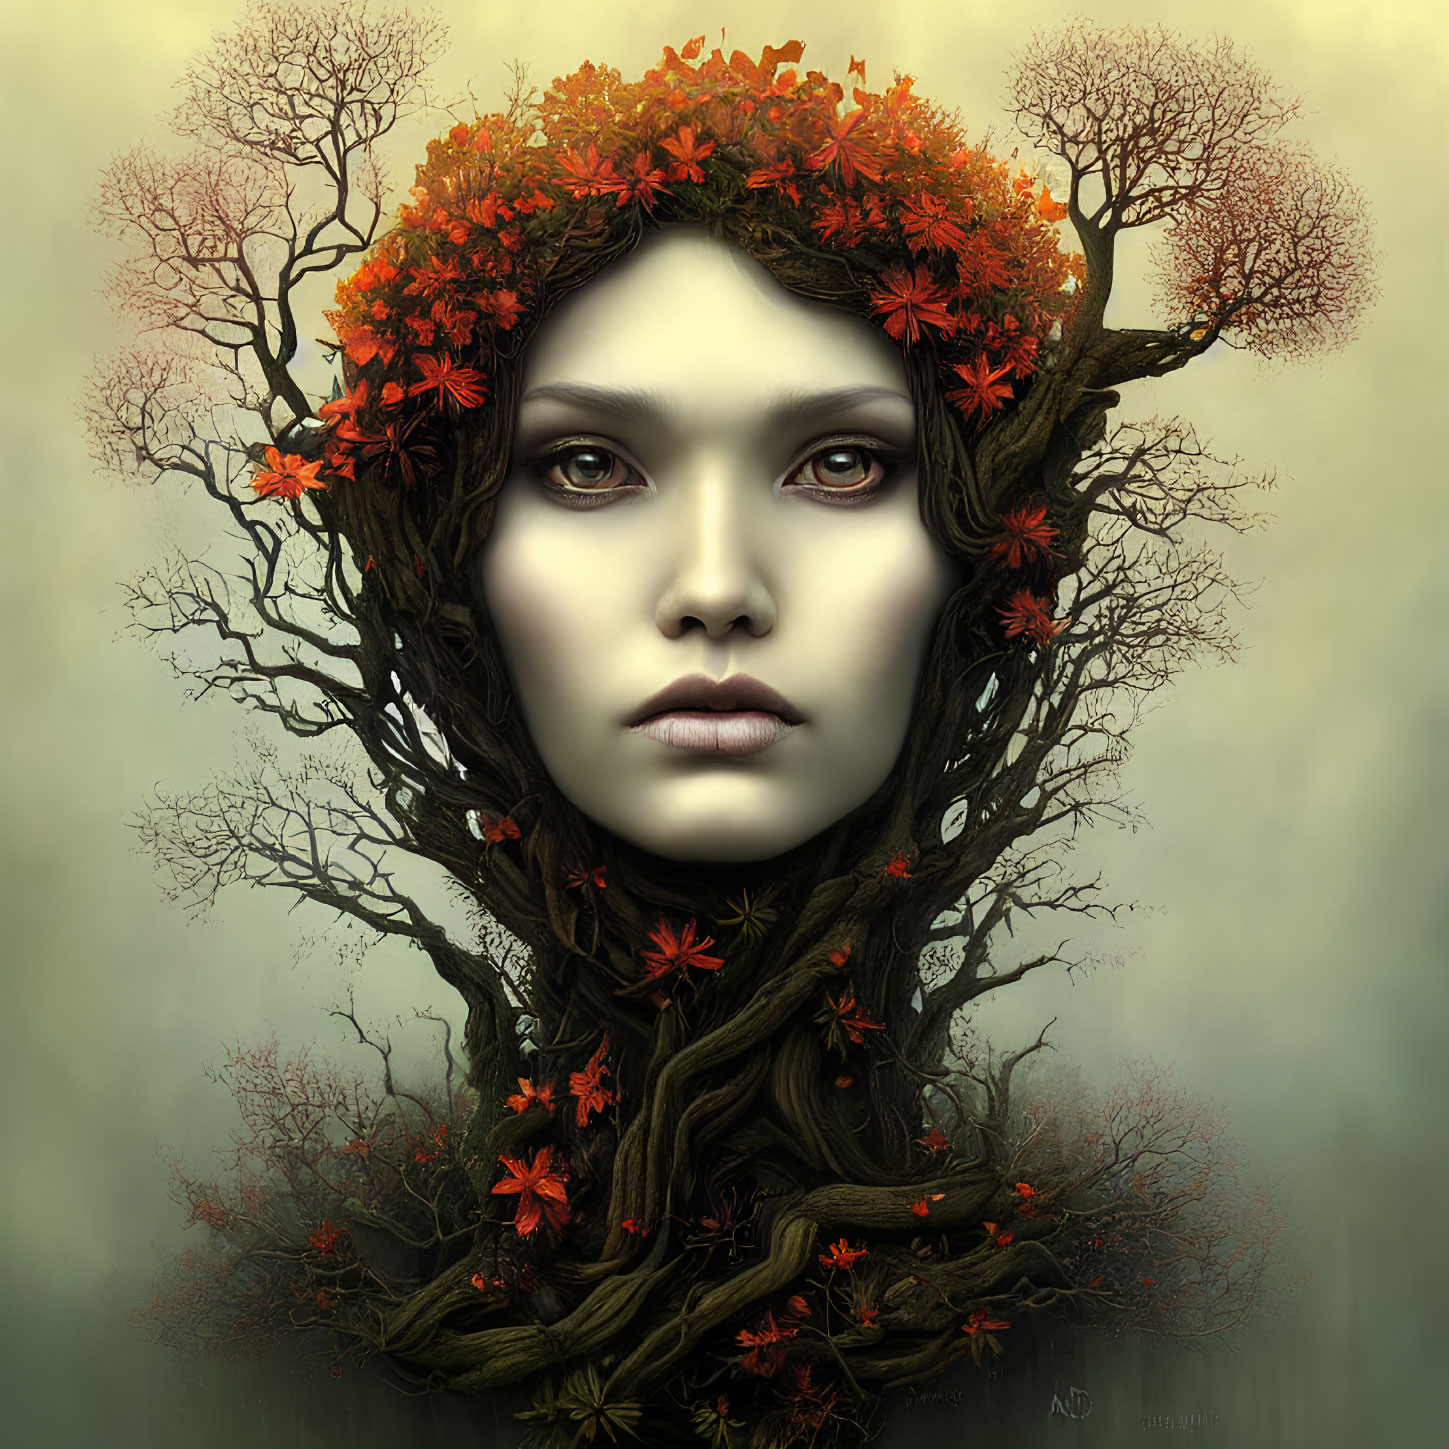 Digital artwork: Woman's face with tree branches and autumn leaves as hair